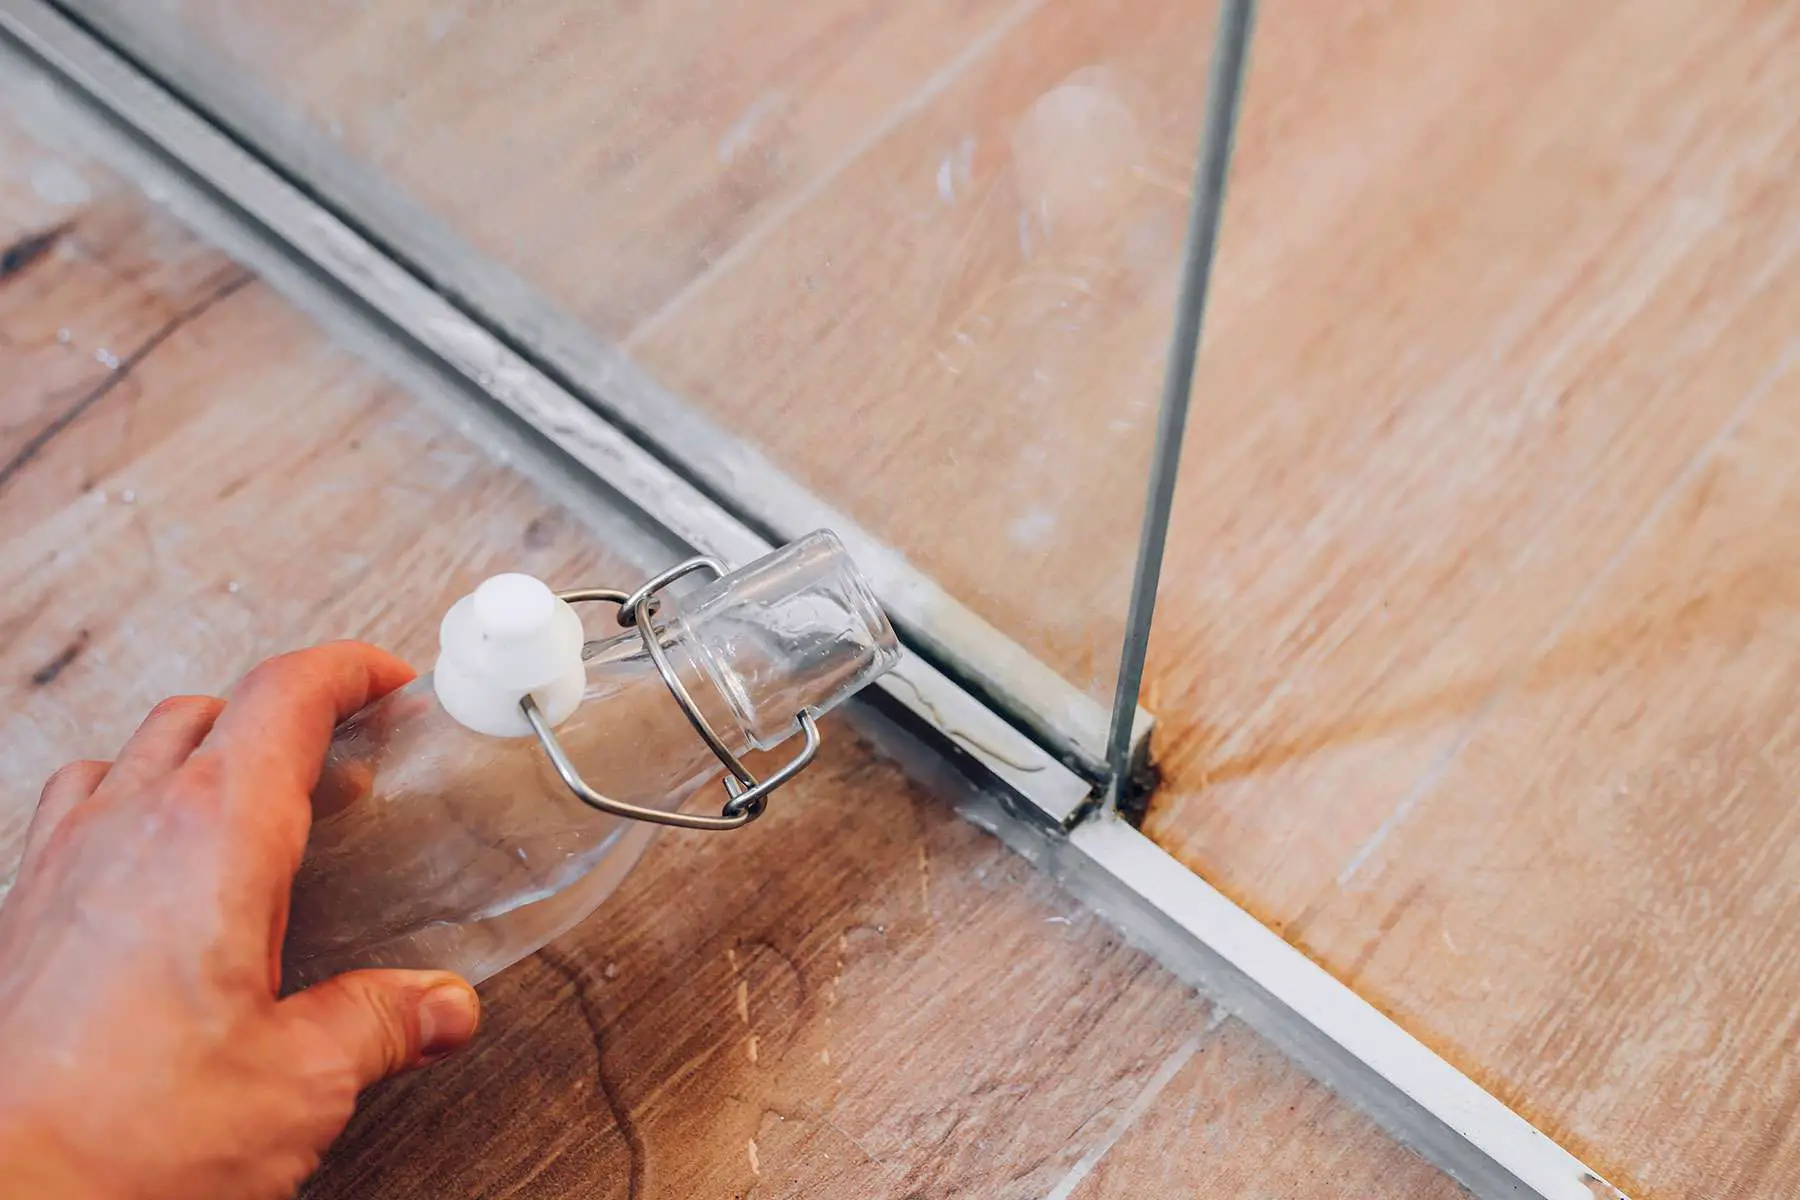 how to clean glass shower doors